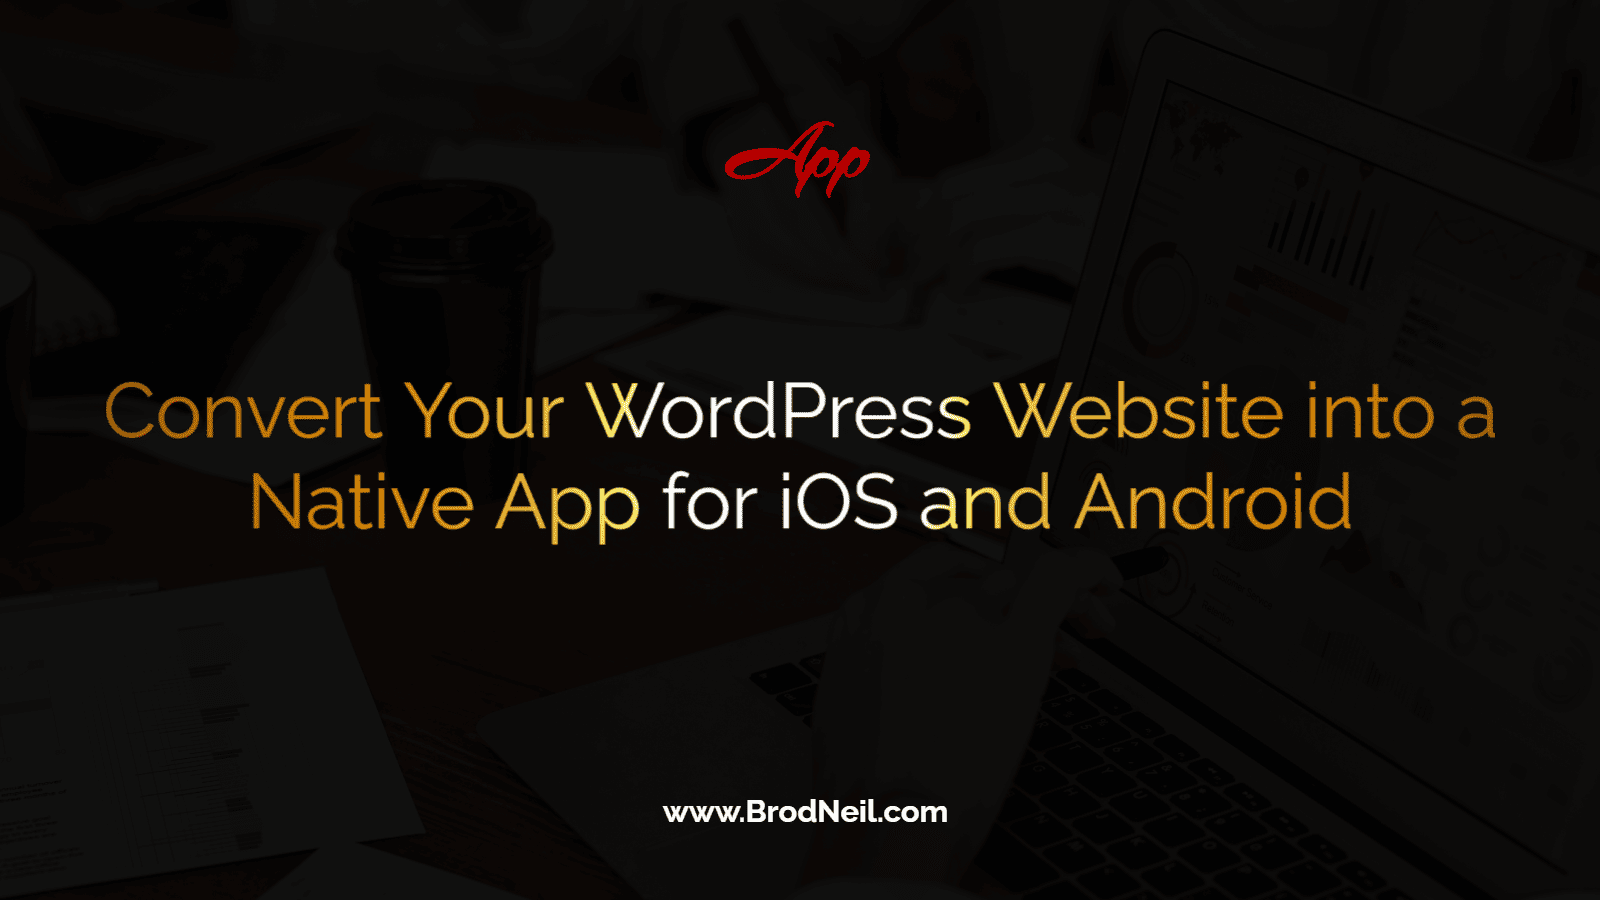 Convert Your WordPress Website into a Native App for iOS and Android